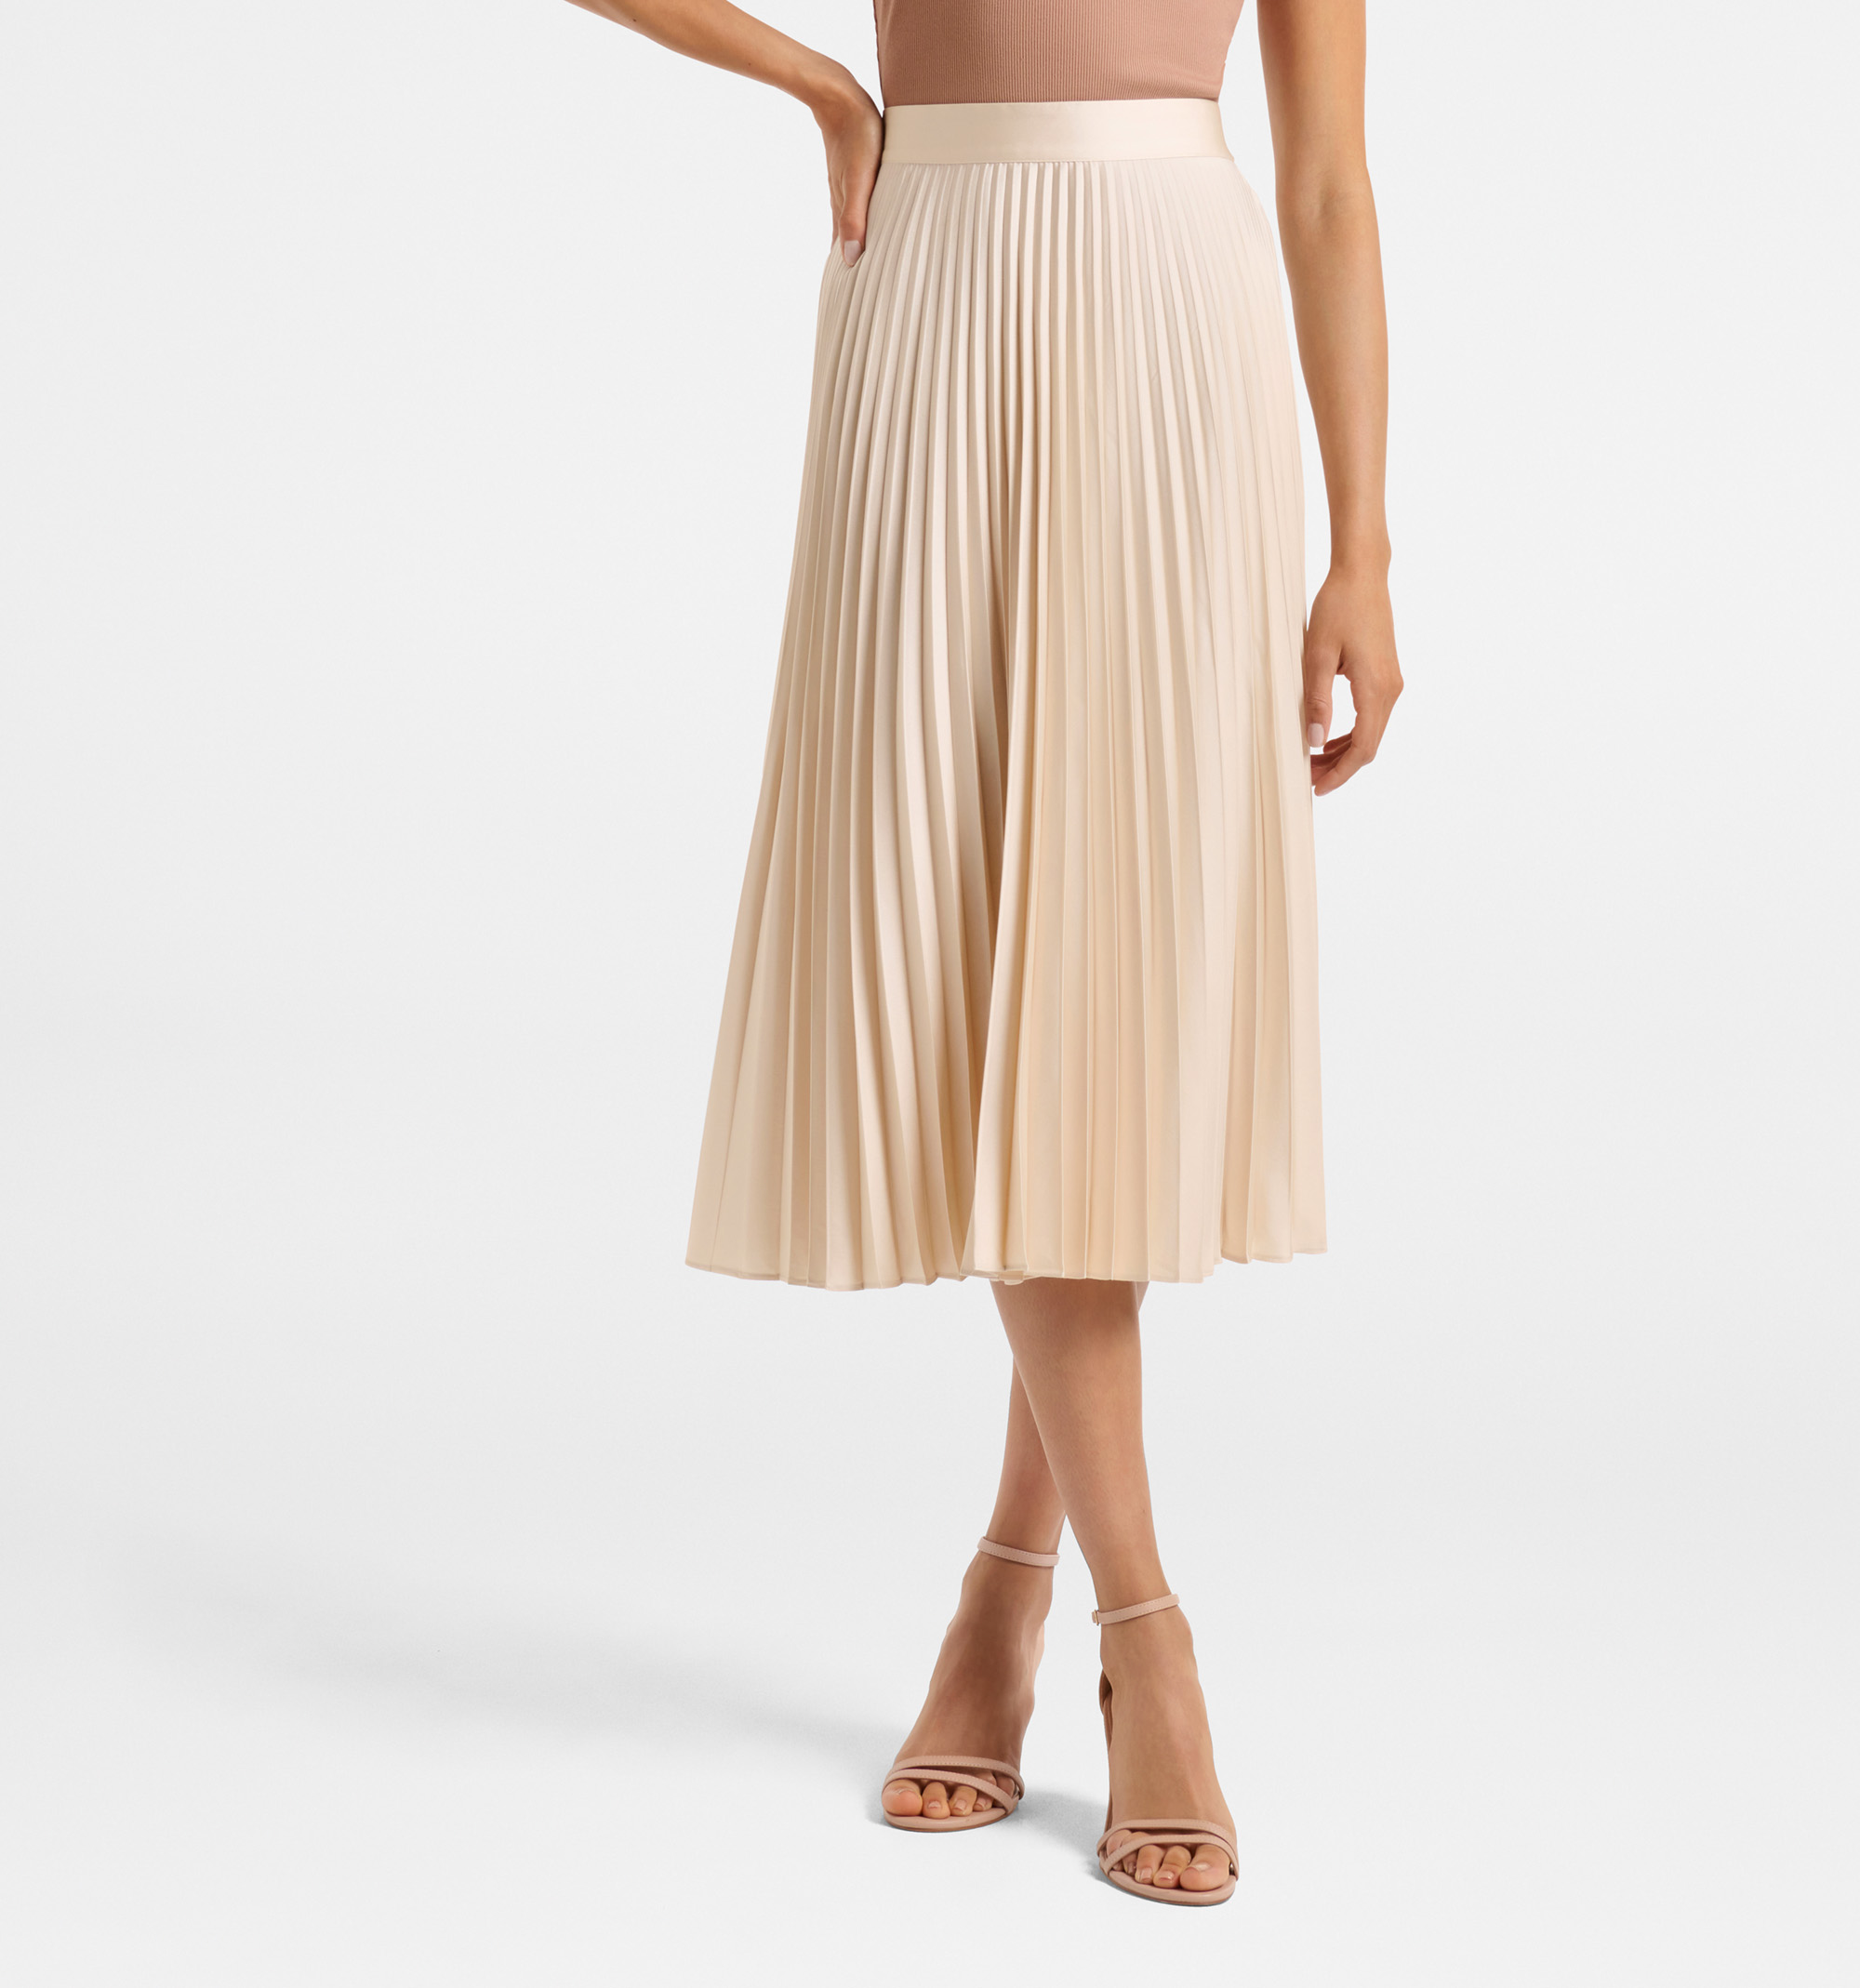 Forever New - Women's Pleated Skirts - 3 products | FASHIOLA.com.au